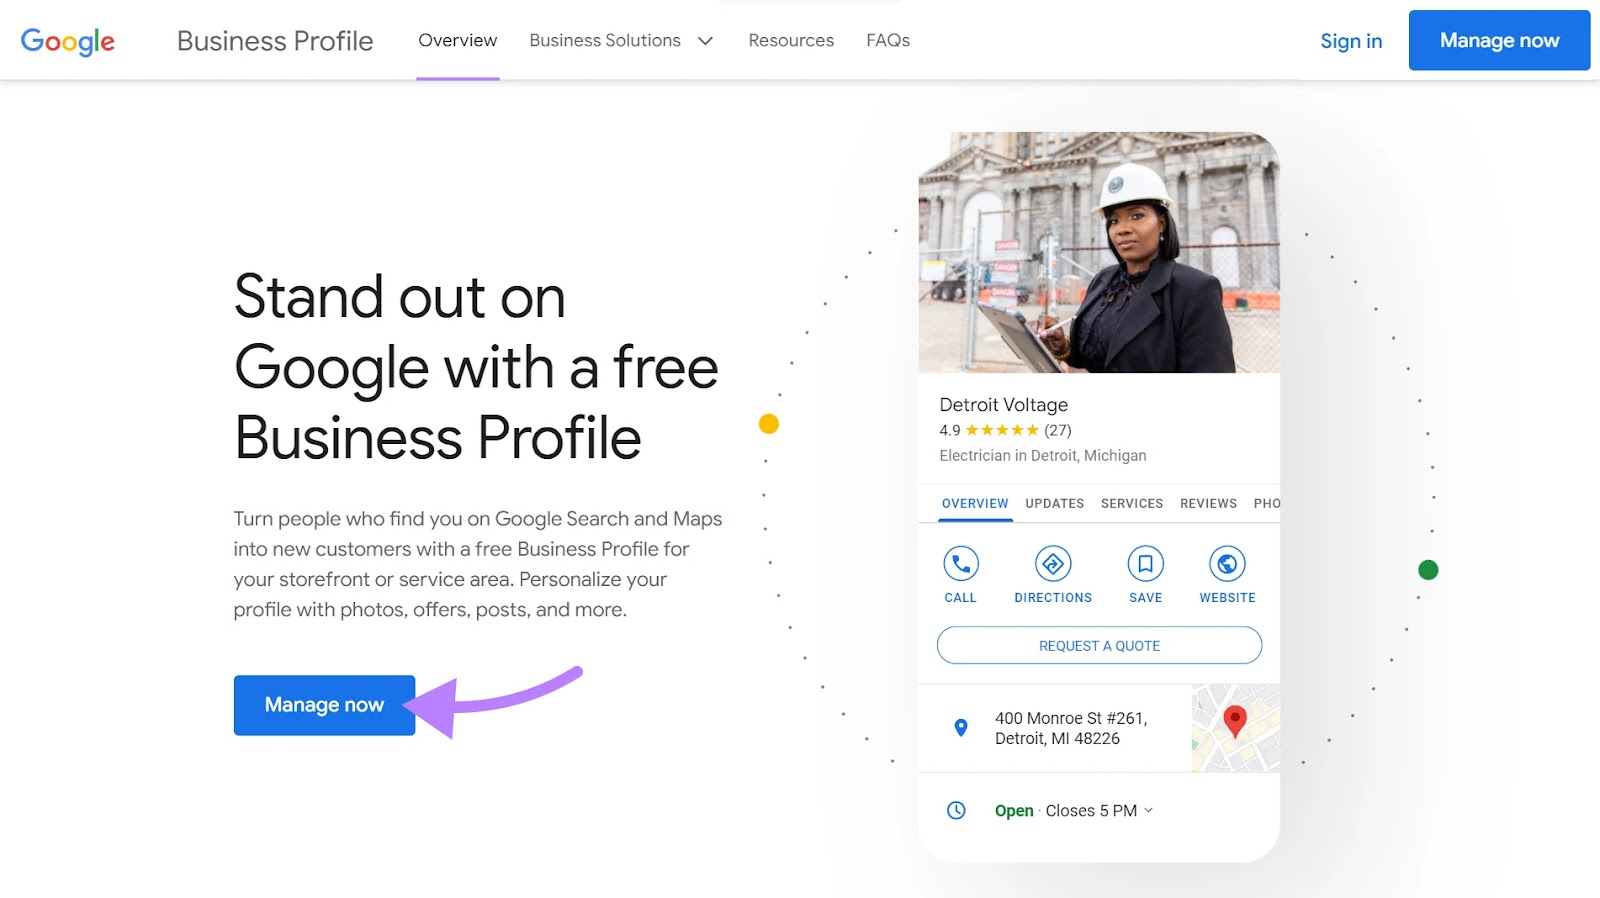 Google Business Profile homepage with the "Manage now" button clicked.